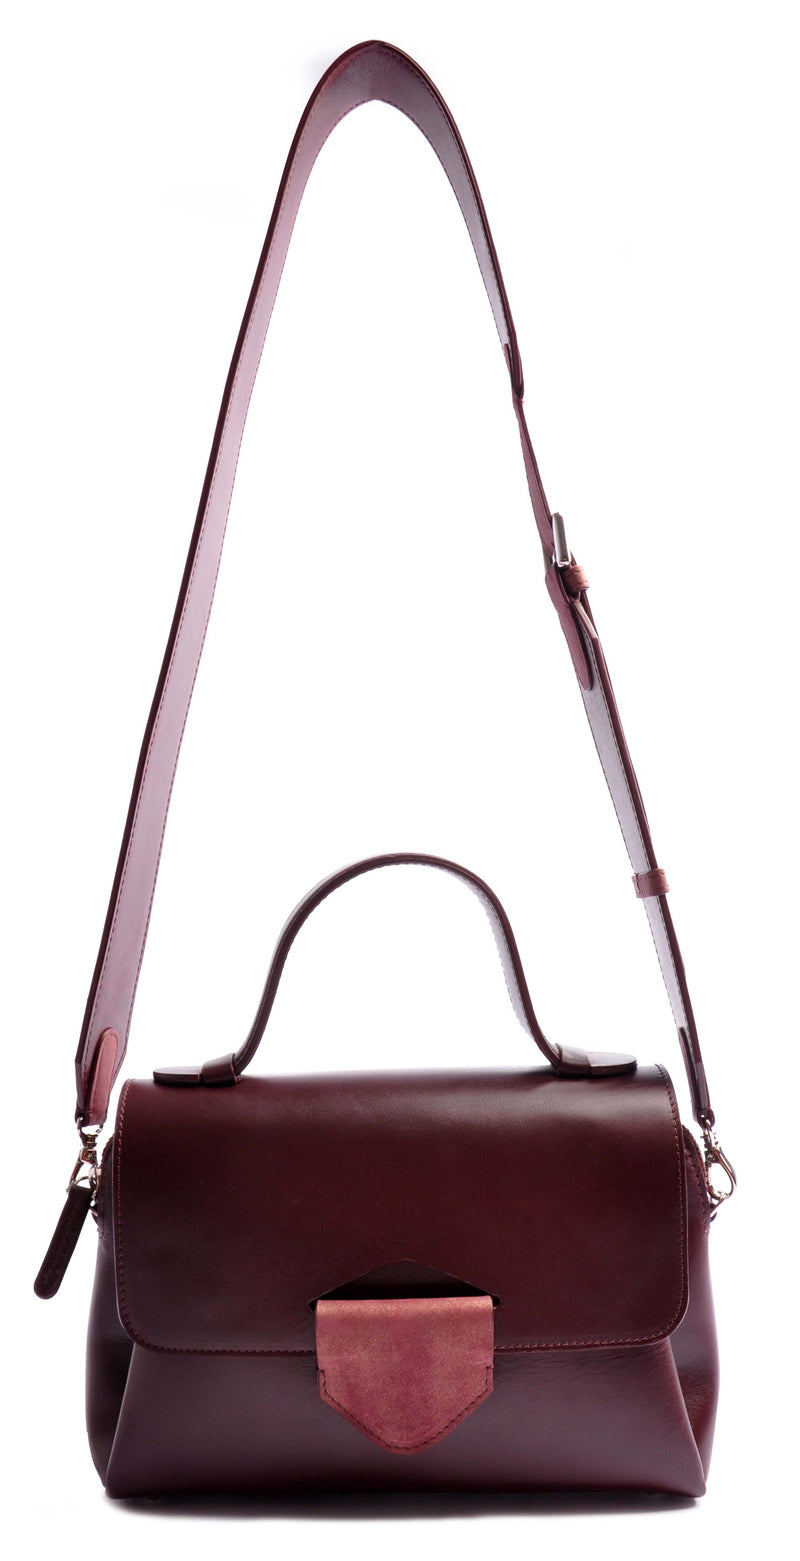 The timeless ARROW TOTE . A classic handbag that never go out of style . Handcrafted in our own Studio